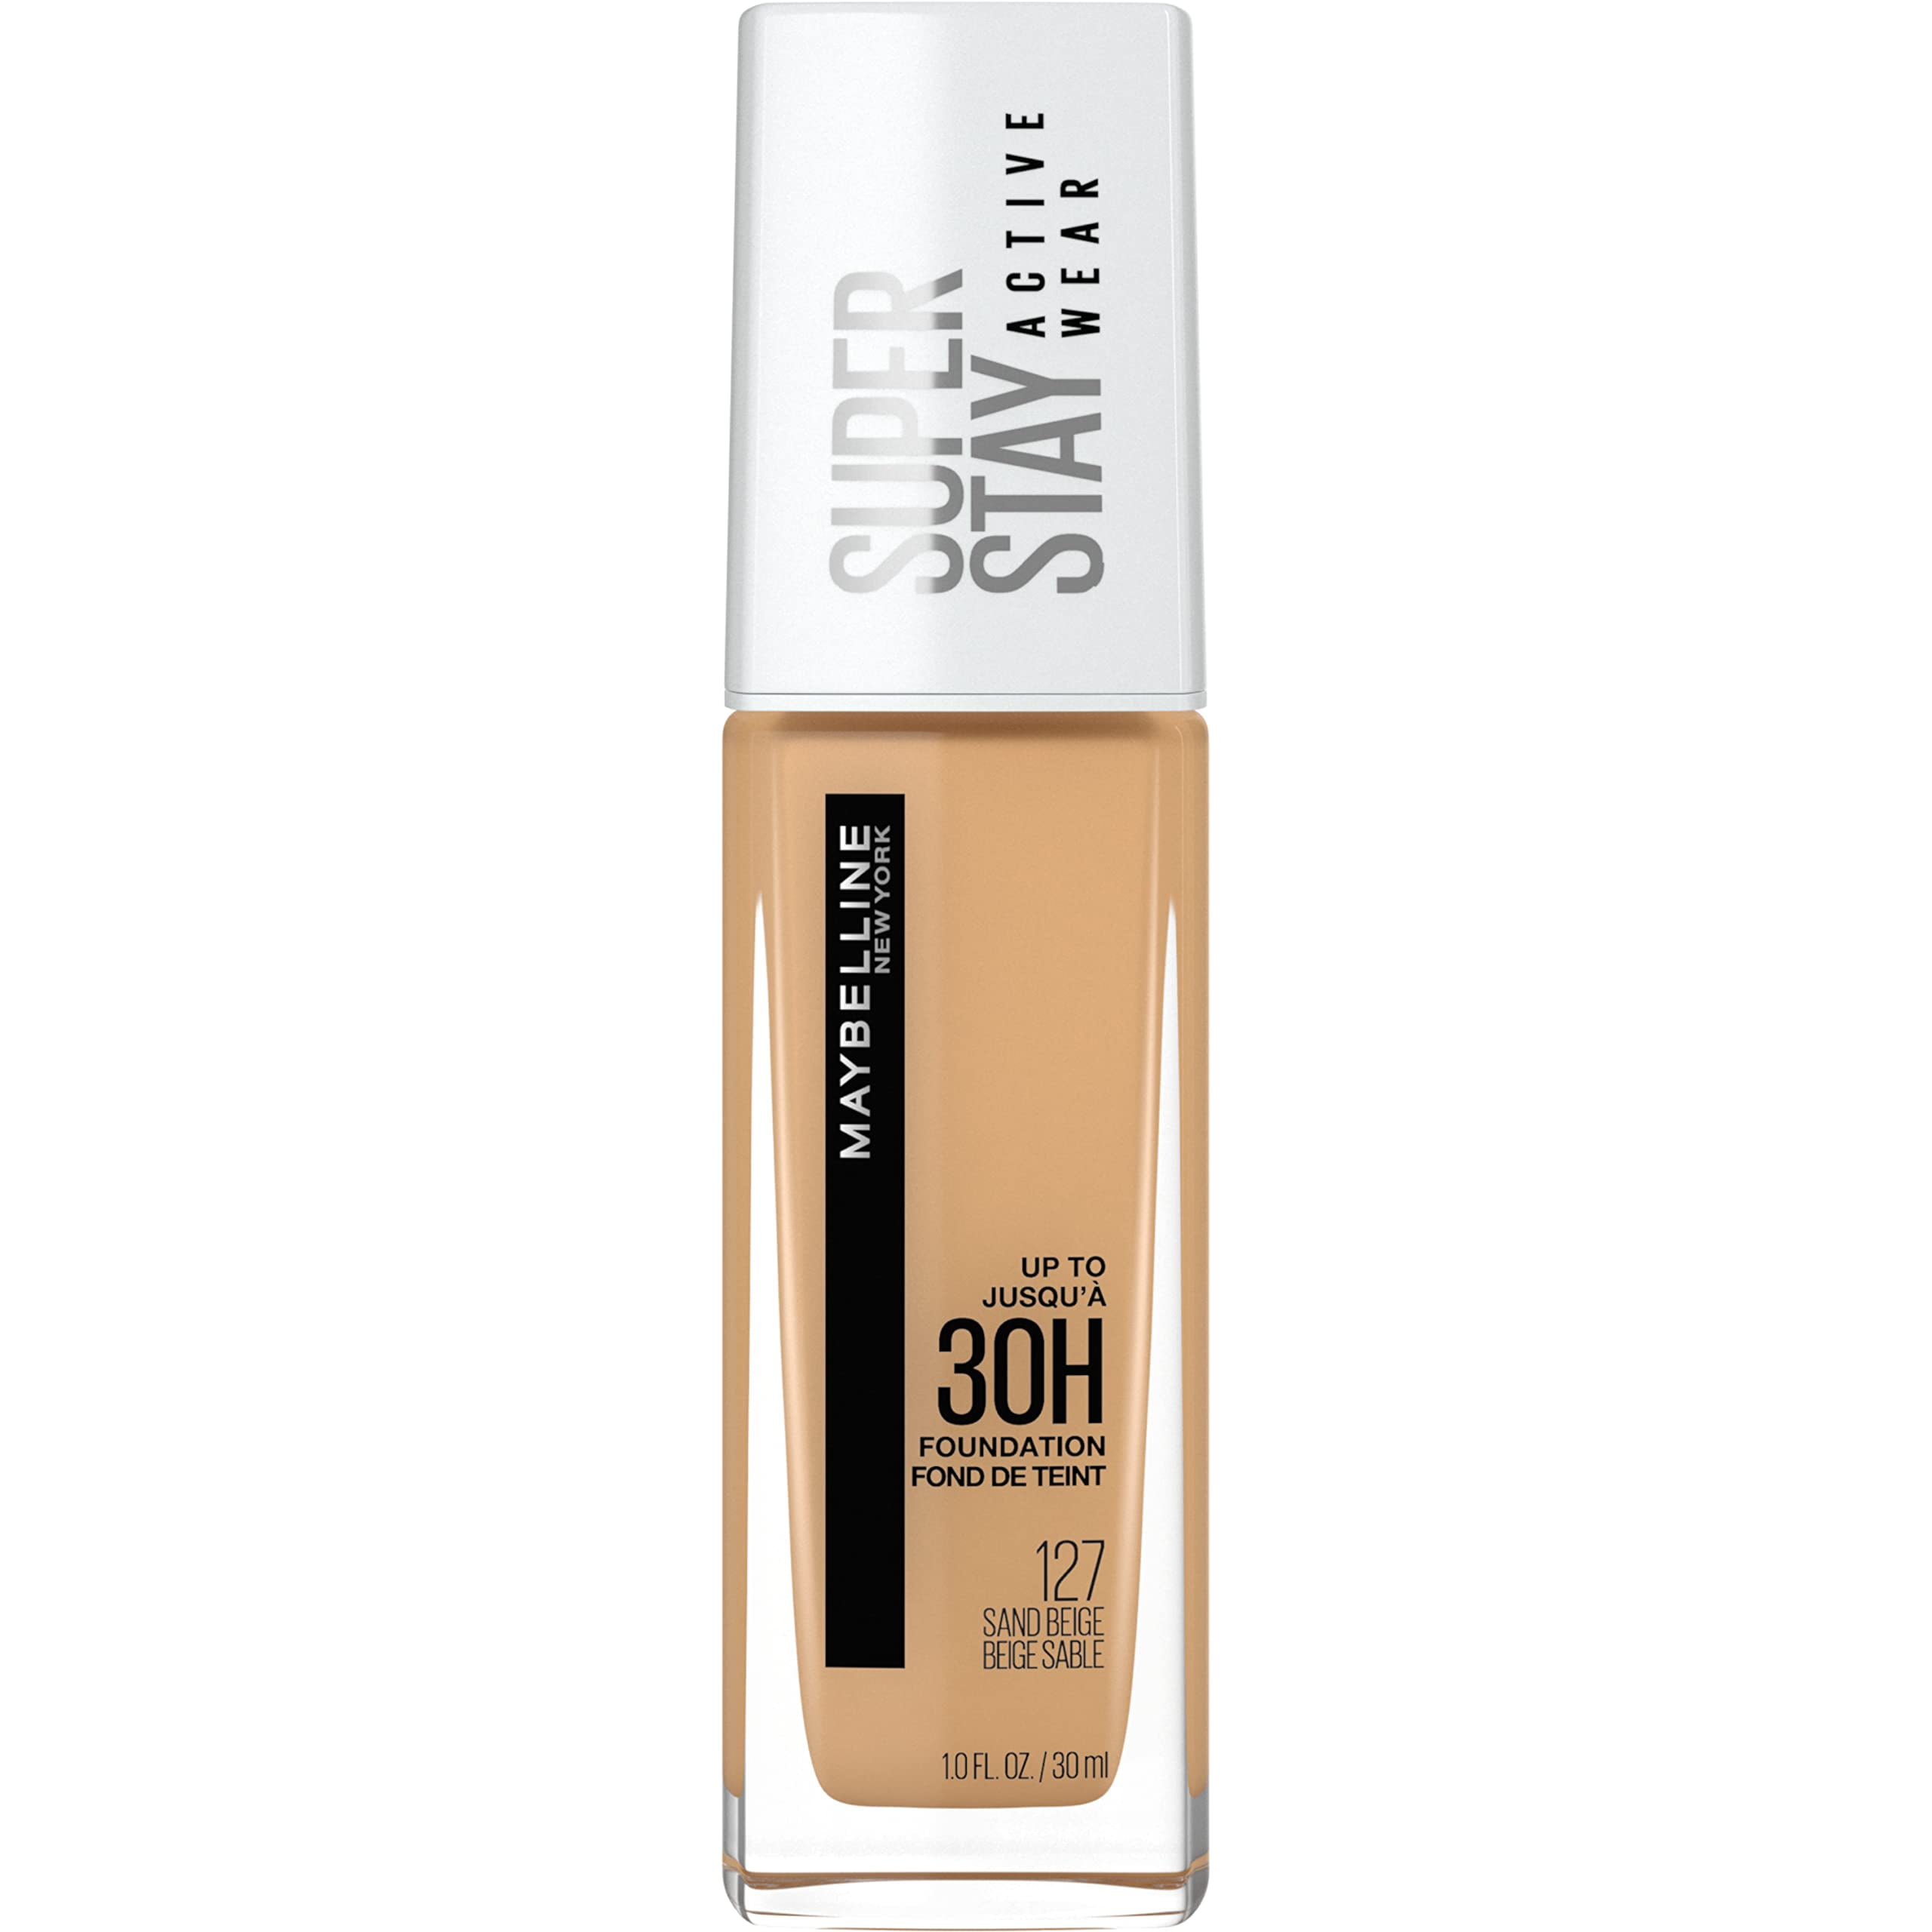 1 Matte Maybelline Sweatproof in Super 30 – to Makeup, Beige Transfer-Resistant for Sand – Coverage - & Stay Count Waterproof, up Gorgeous Foundation Stay Liquid Activewear Hours! Full Finish